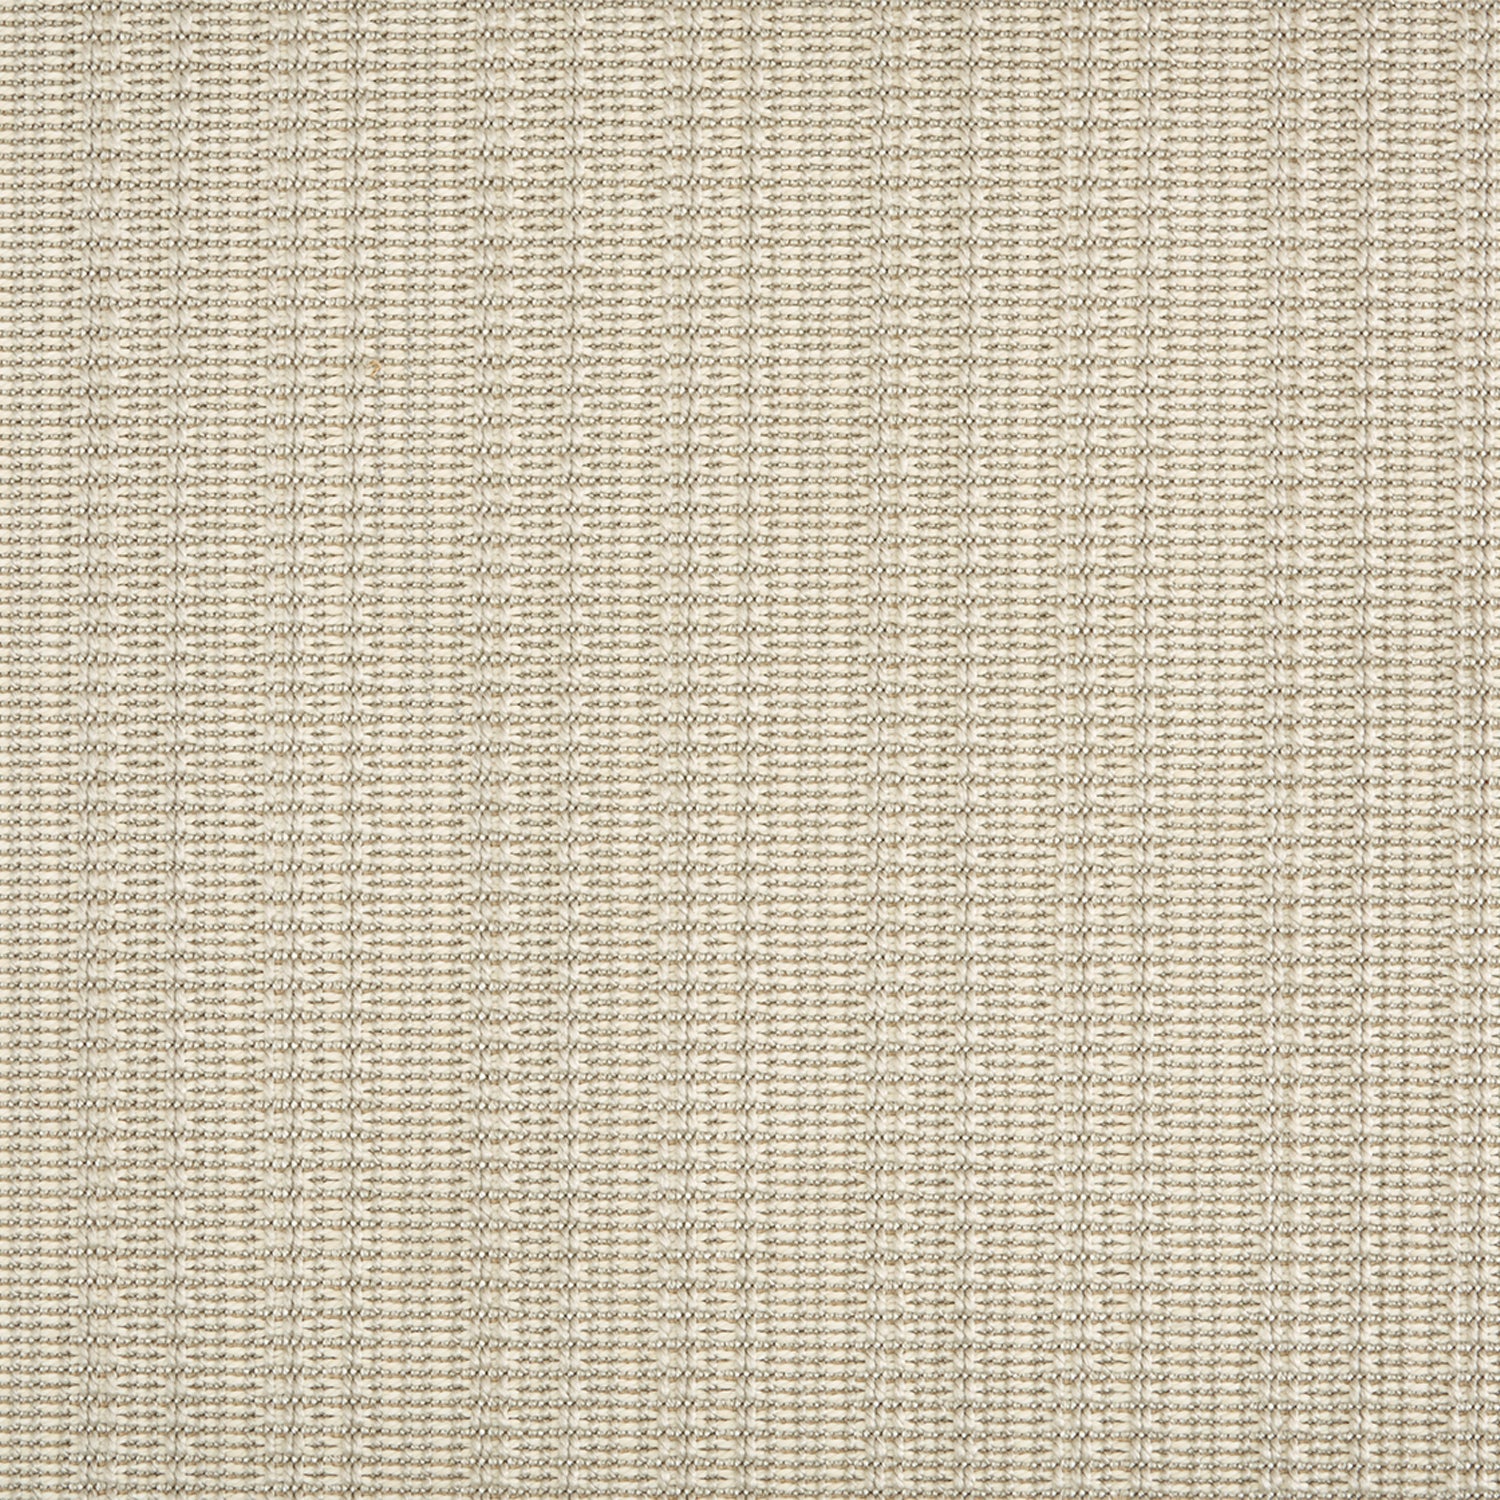 Outdoor broadloom carpet swatch in a flat grid weave in shades of cream.